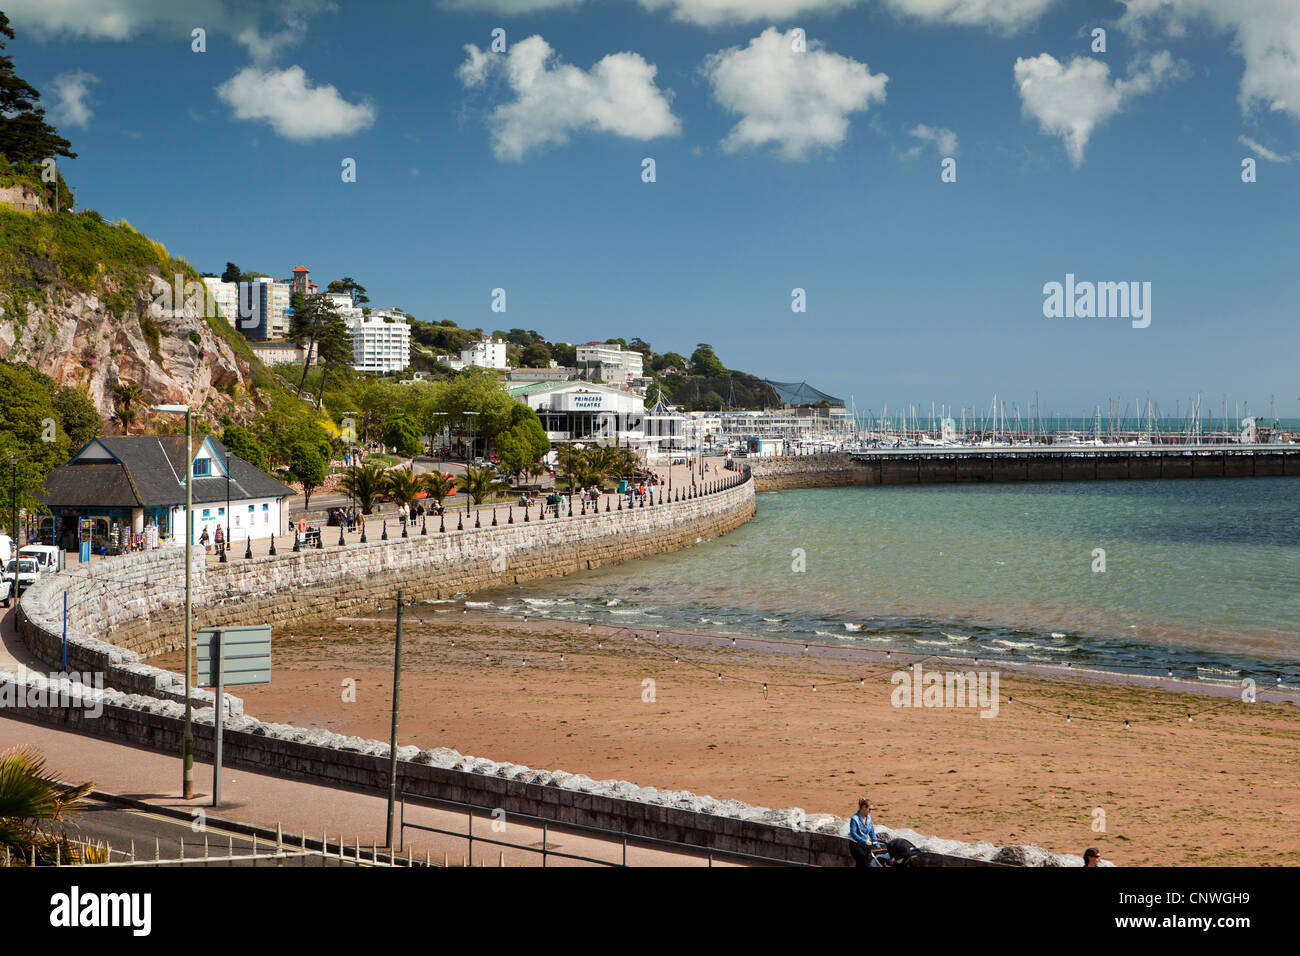 Business for sale torquay